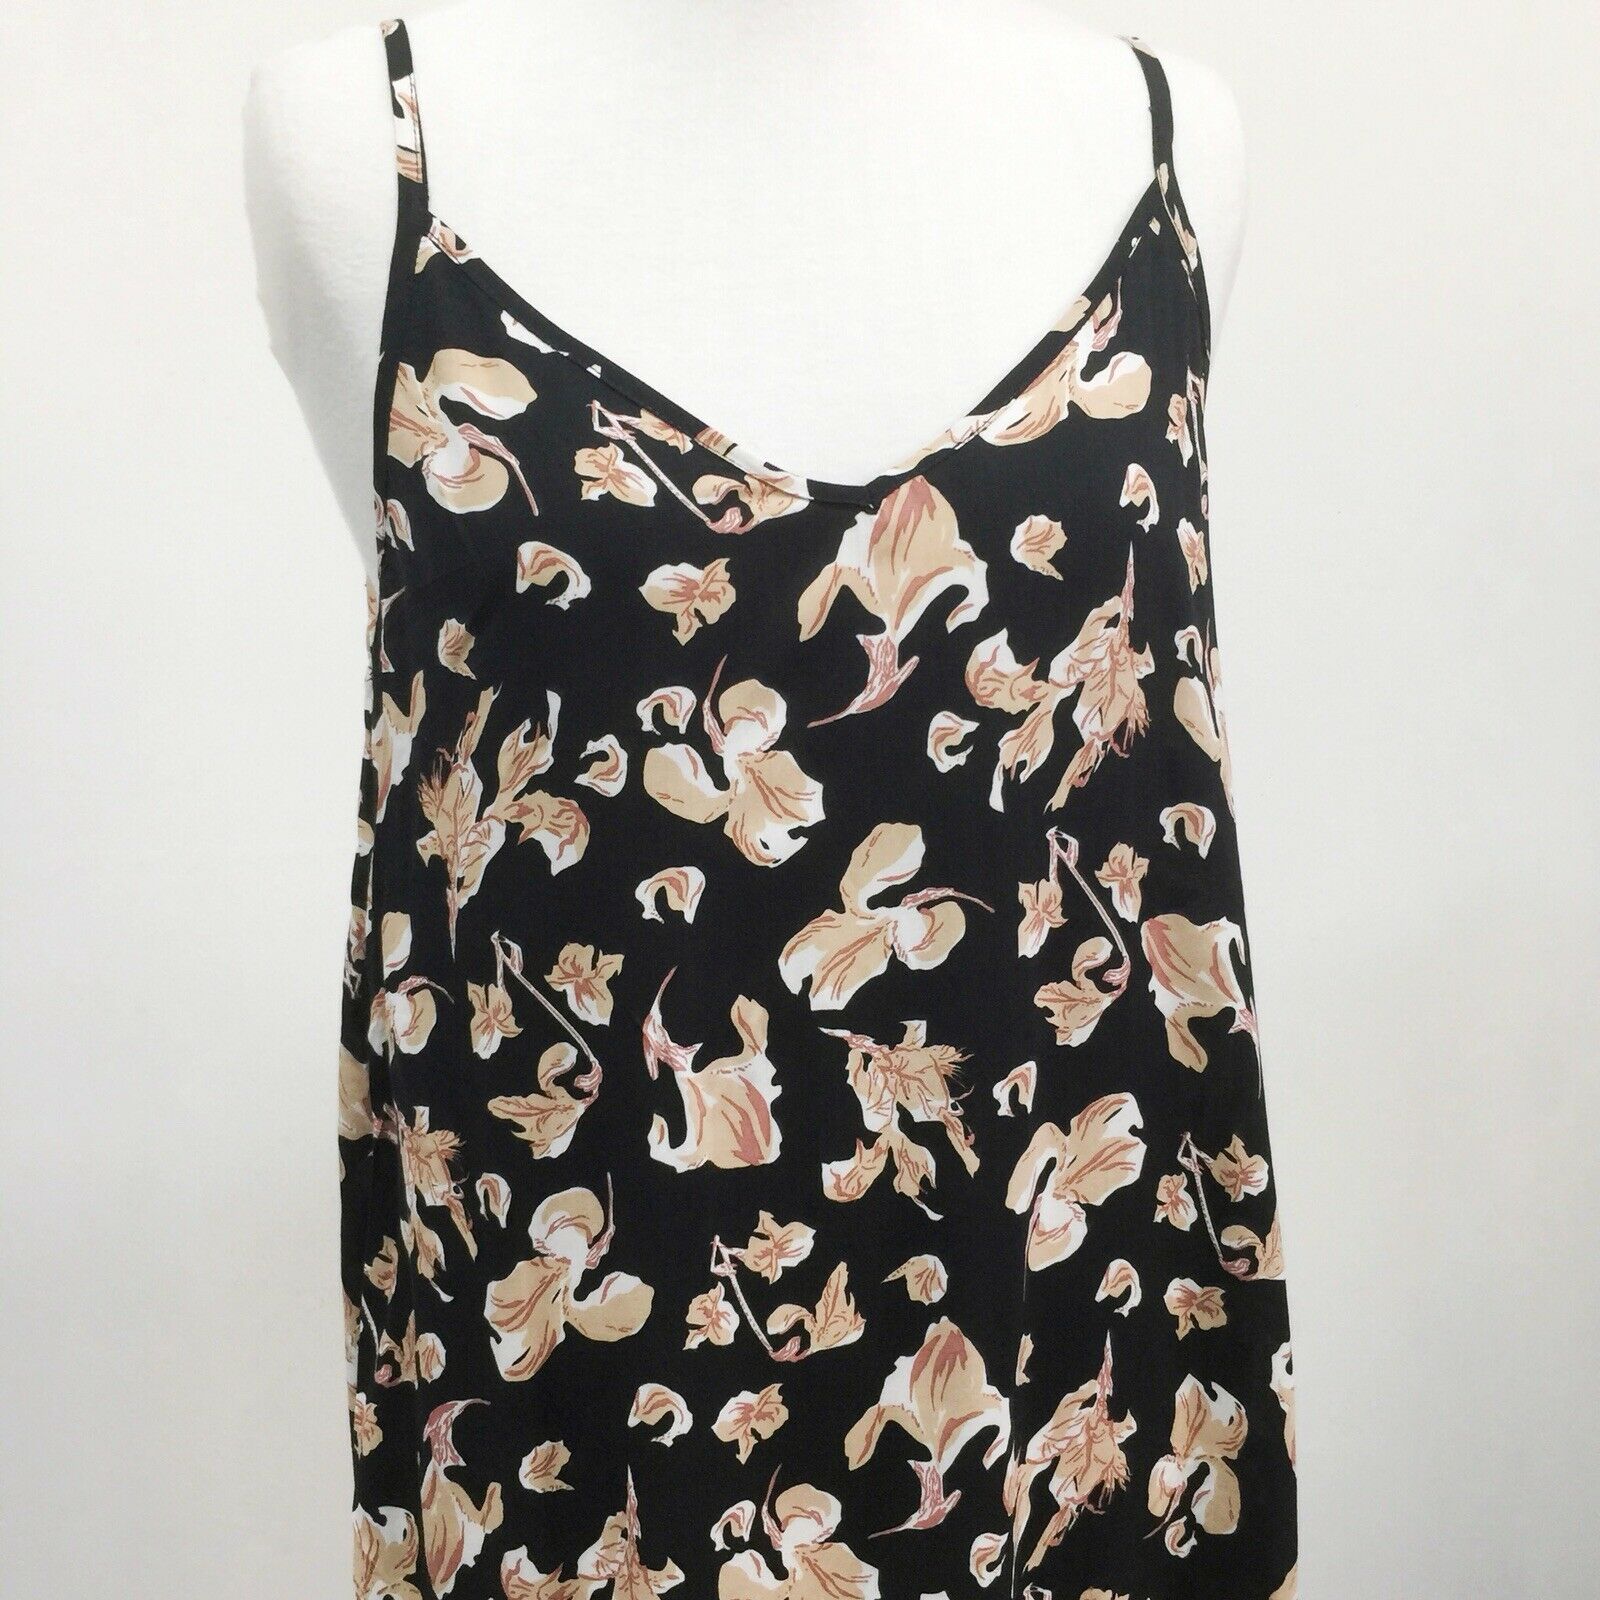 Bamboo Blonde Black Peach Floral Dress - Size S